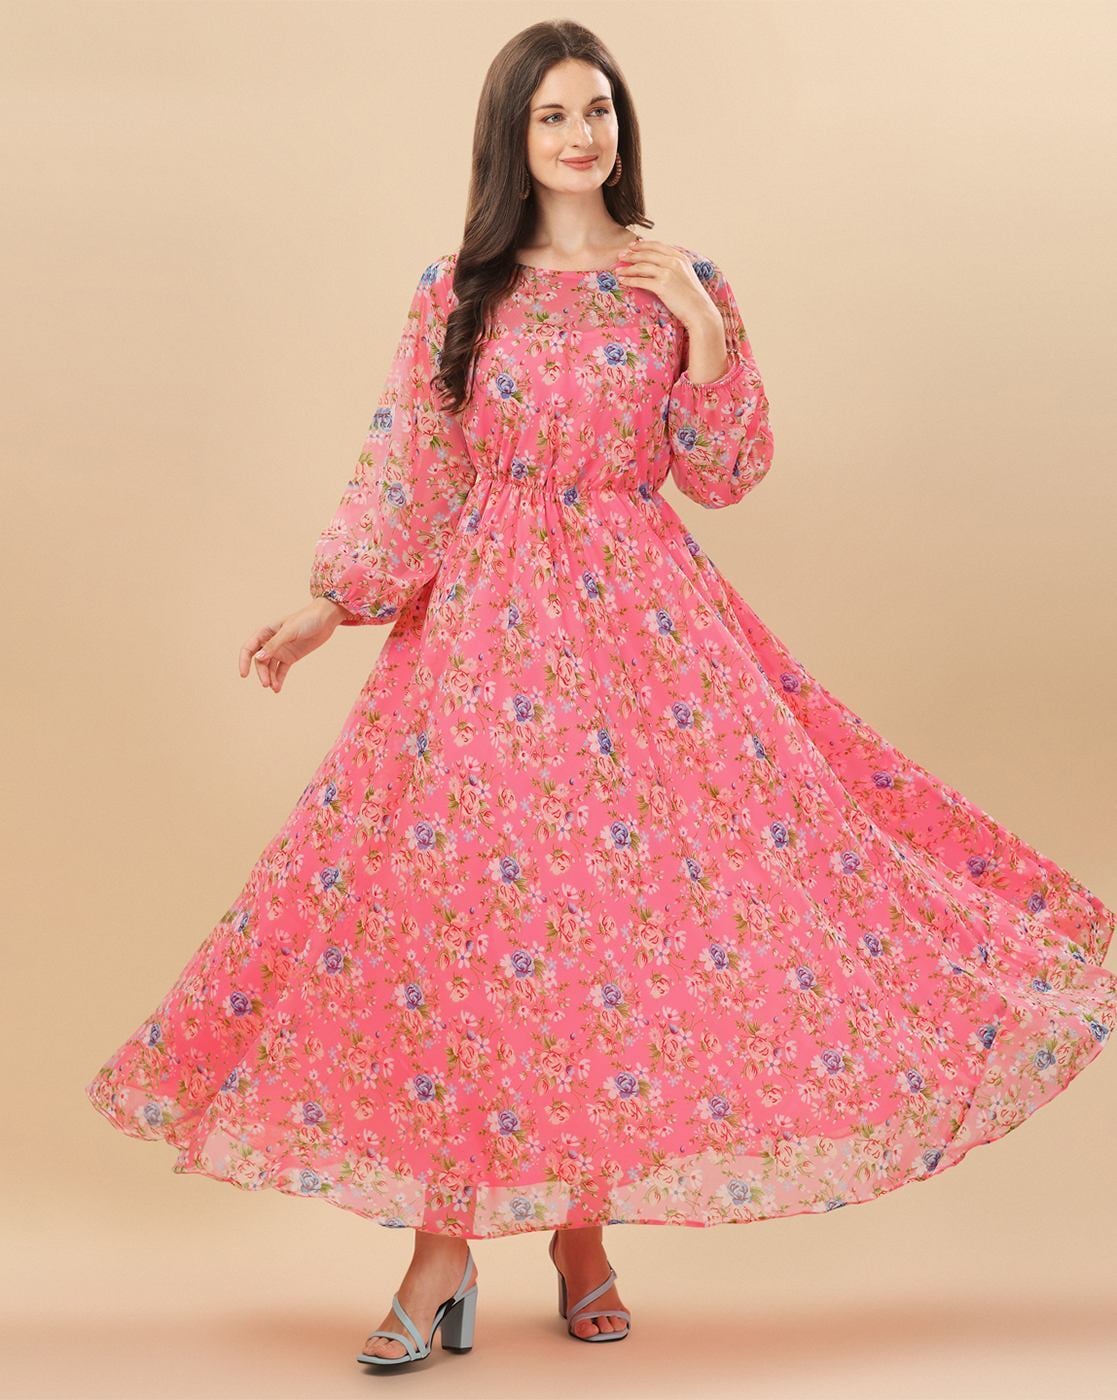 Western Dresses in Pakistan | Long Frocks and Maxi Designs (2021)